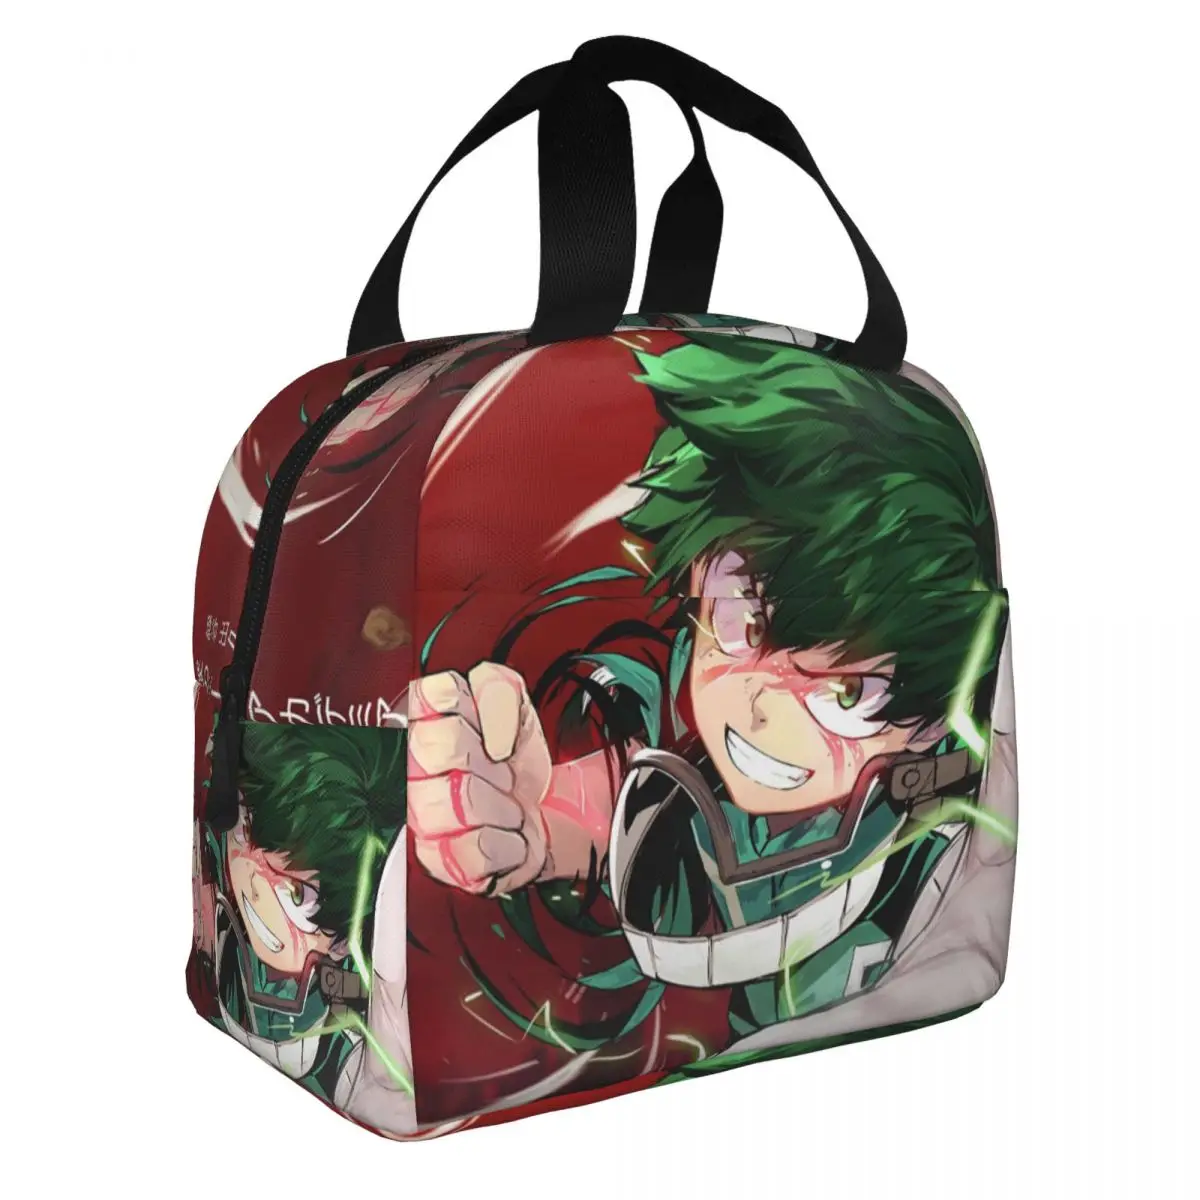 Anime - My Hero Academia Lunch Bento Bags Portable Aluminum Foil thickened Thermal Cloth Lunch Bag for Women Men Boy